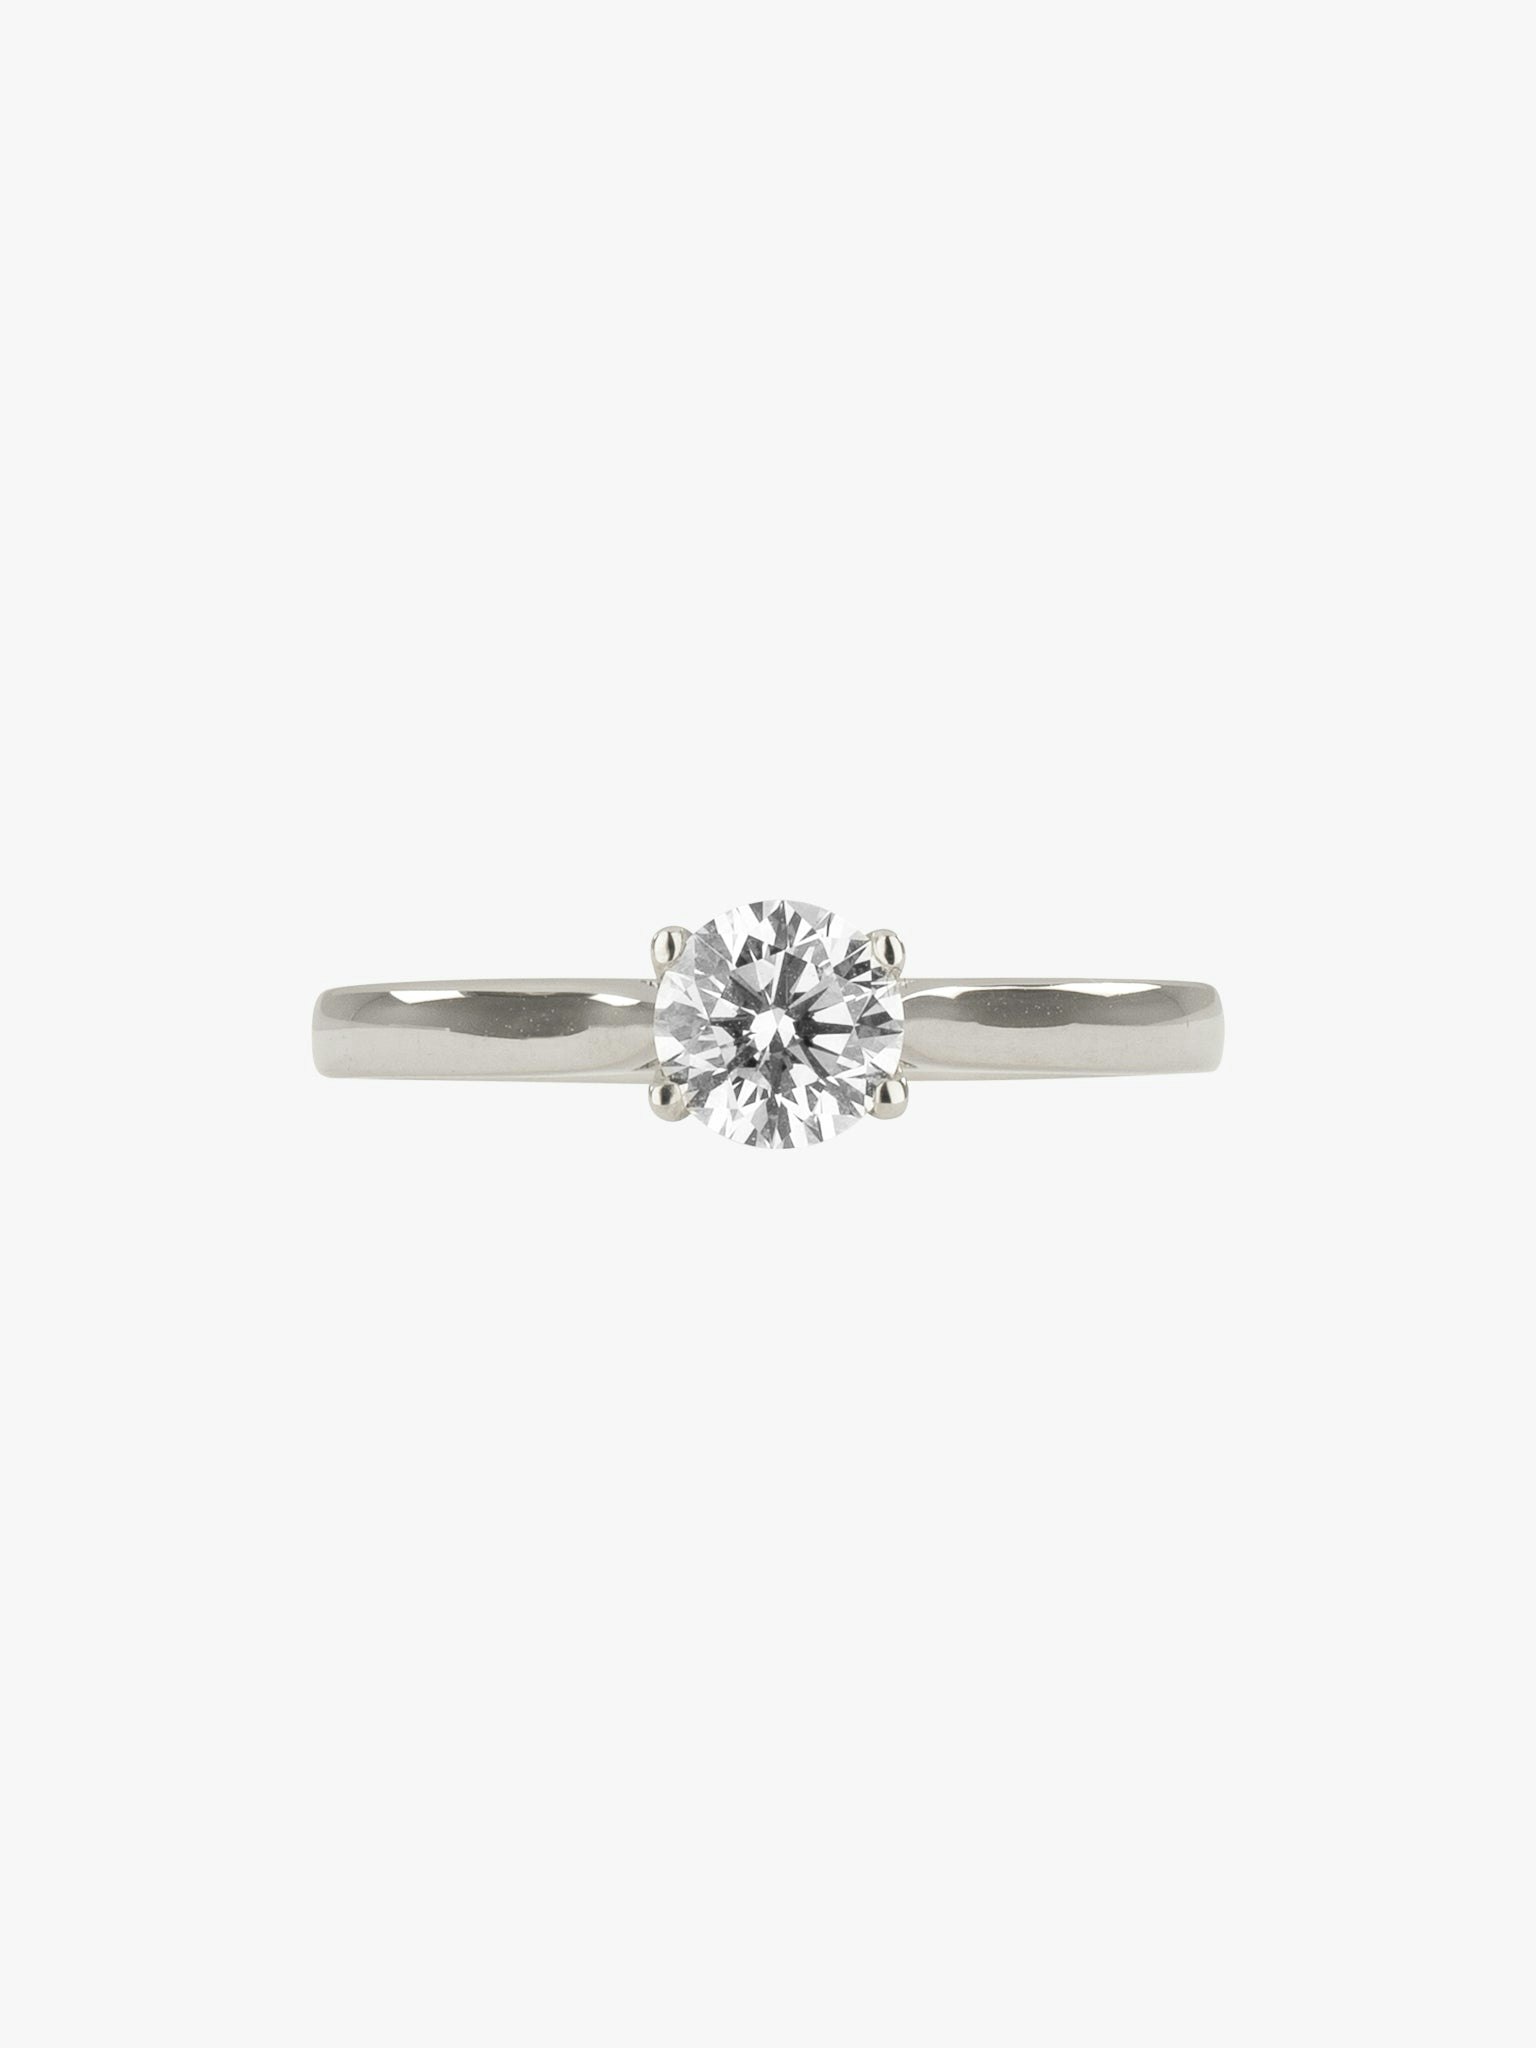 Large solitaire diamond ring photo 1